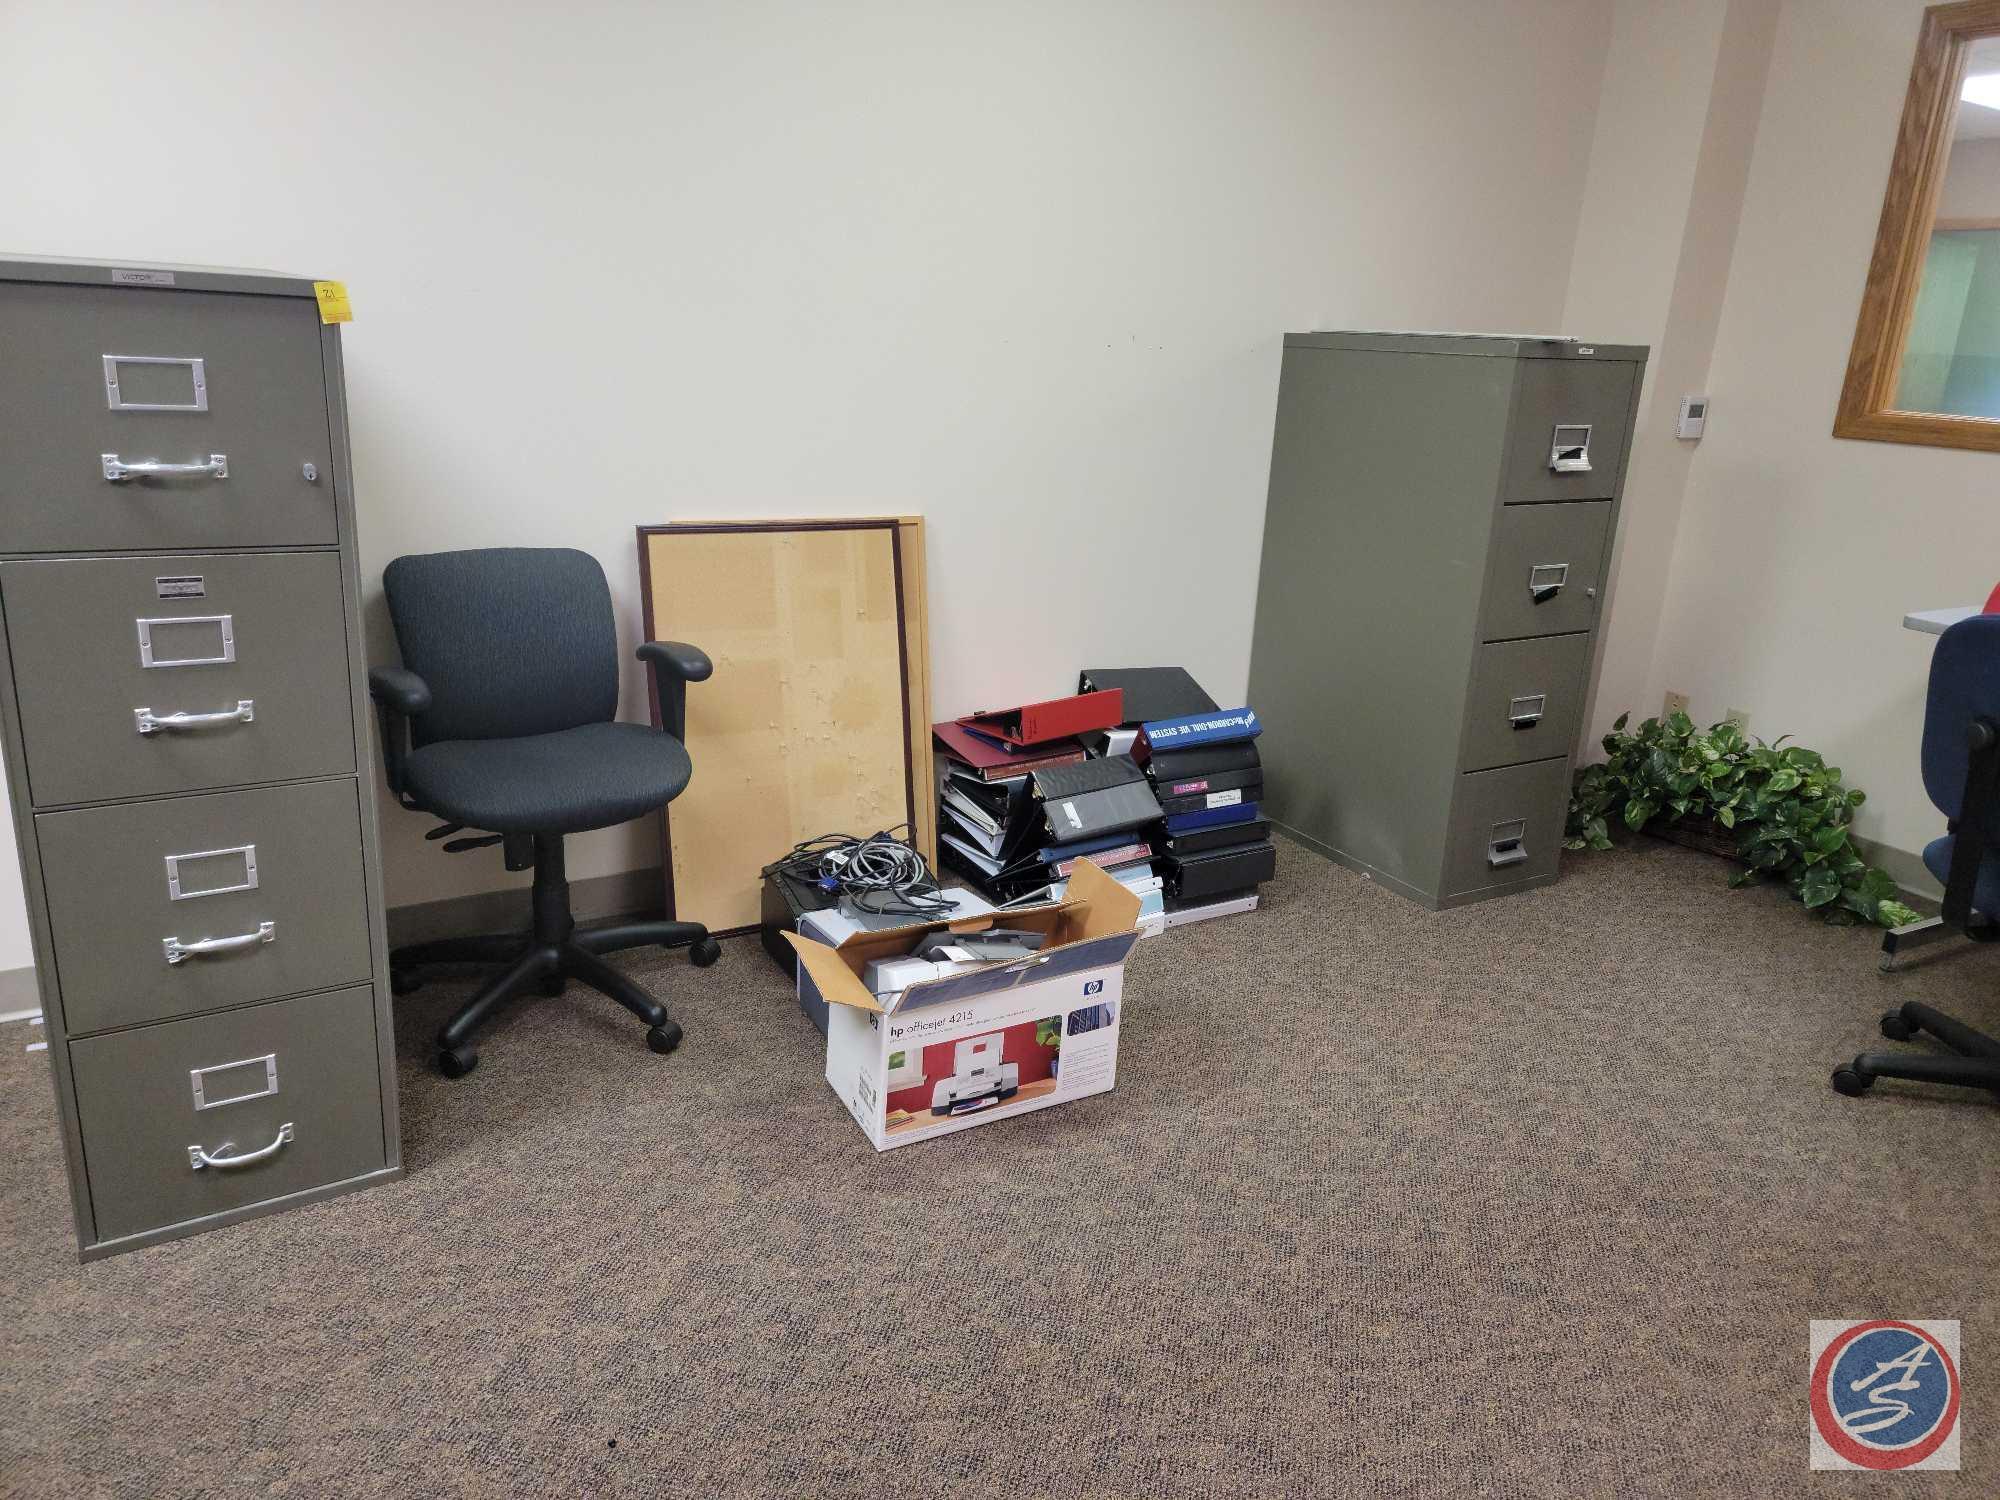 (2) 4 drawer metal file cabinets, 4 stacks of large binders, 2 cork boards, 3 HP printers and cloth